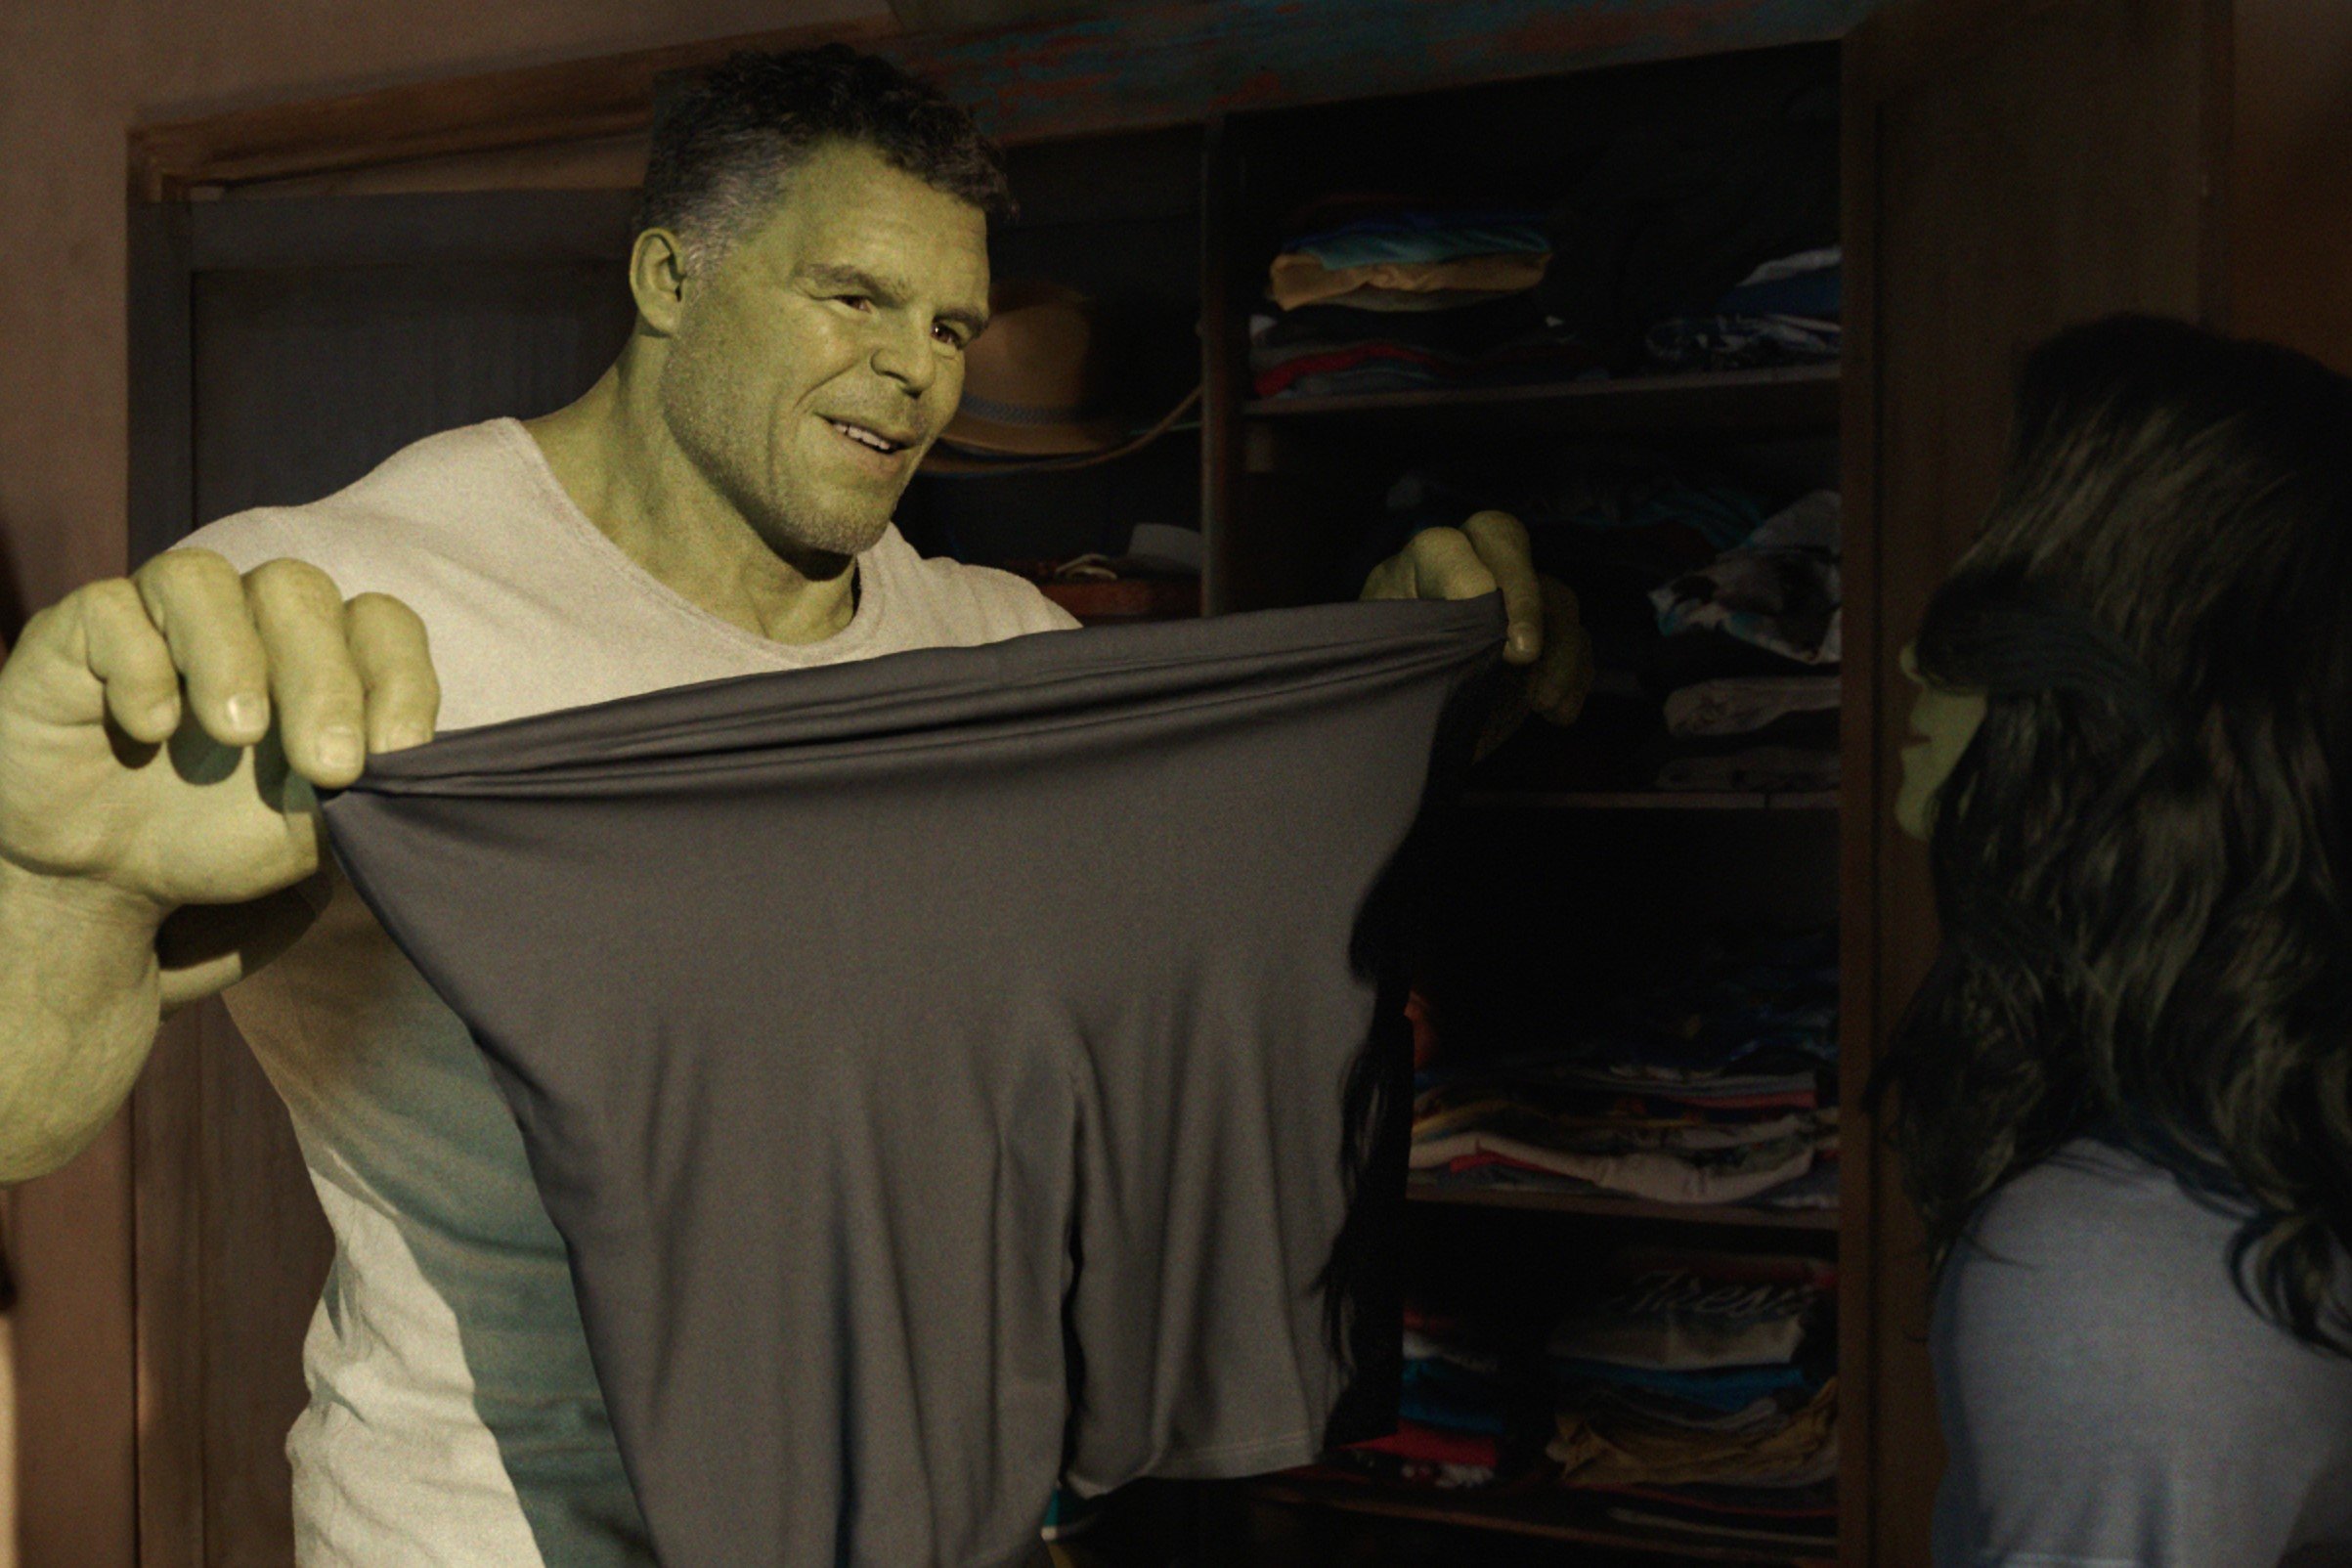 Mark Ruffalo, in character as Bruce Banner/Hulk in 'She-Hulk: Attorney at Law' in the MCU, wears a white shirt and holds up a pair of gray shorts.